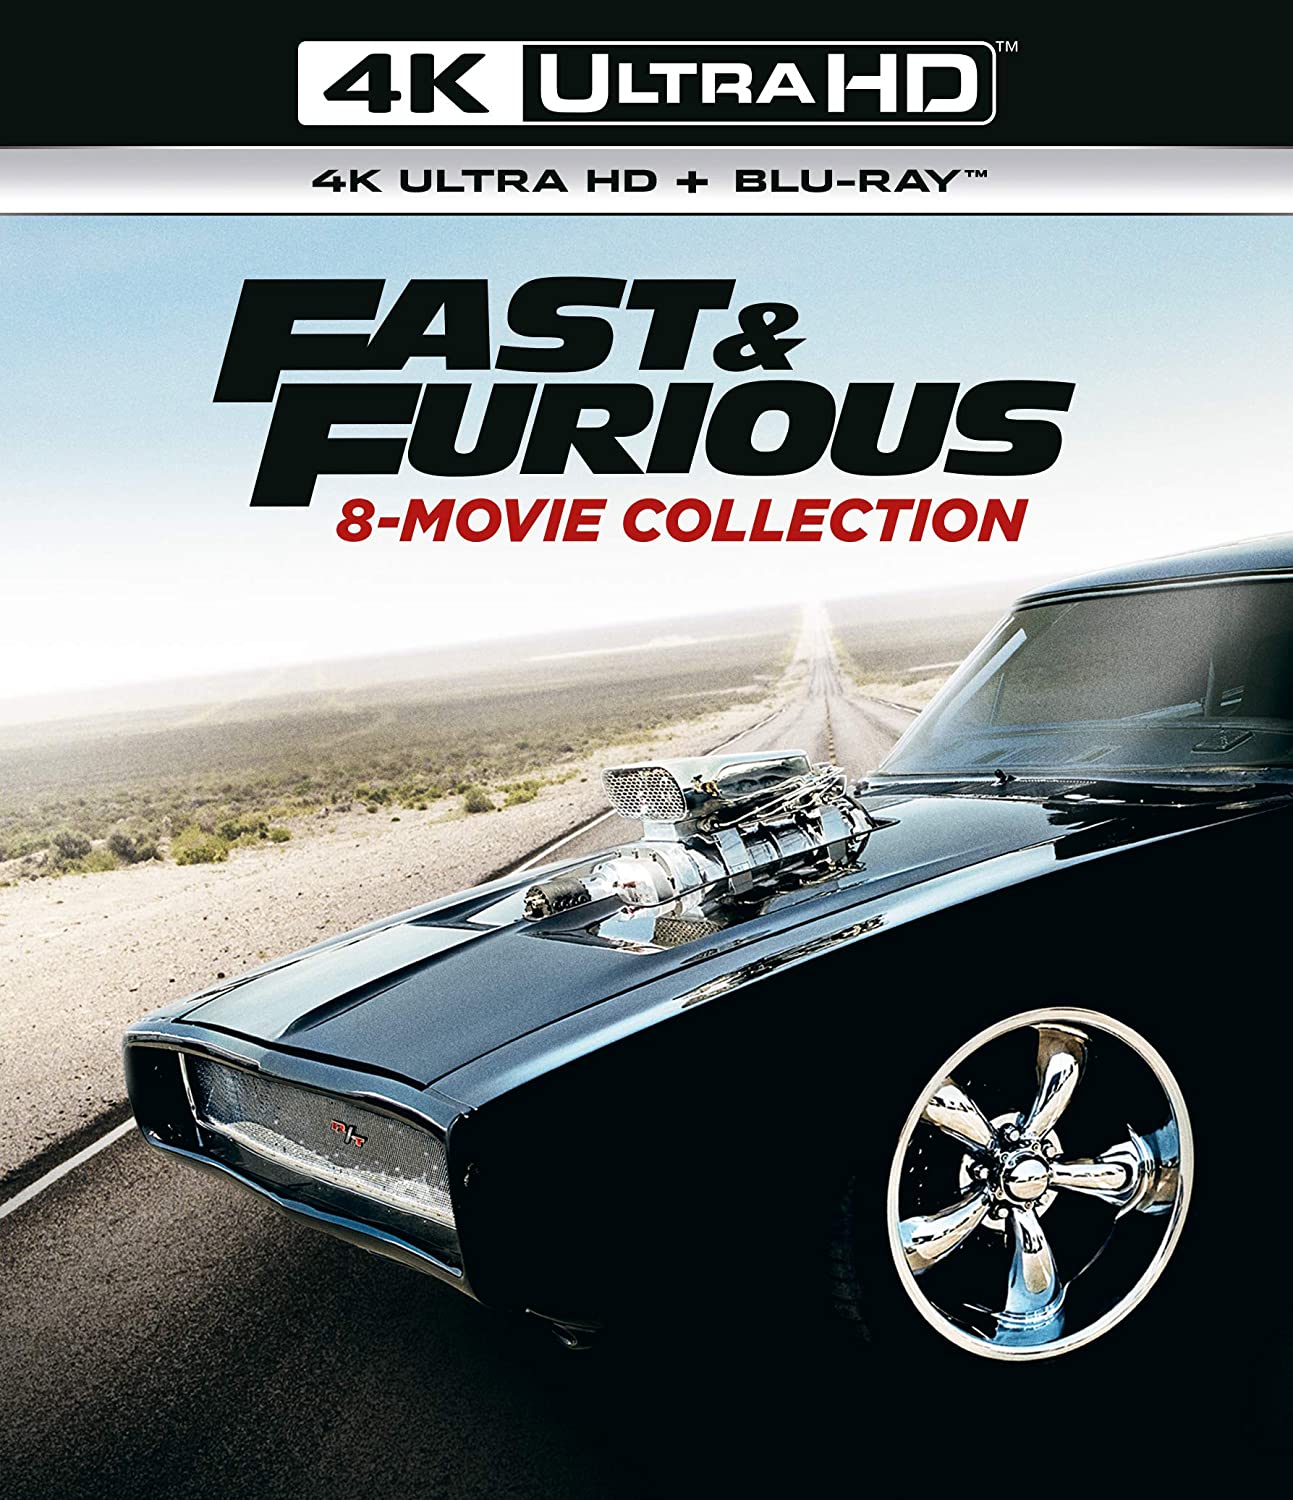 Fast And Furious: 8 Film Collection (4K Ultra HD + Blu-ray)